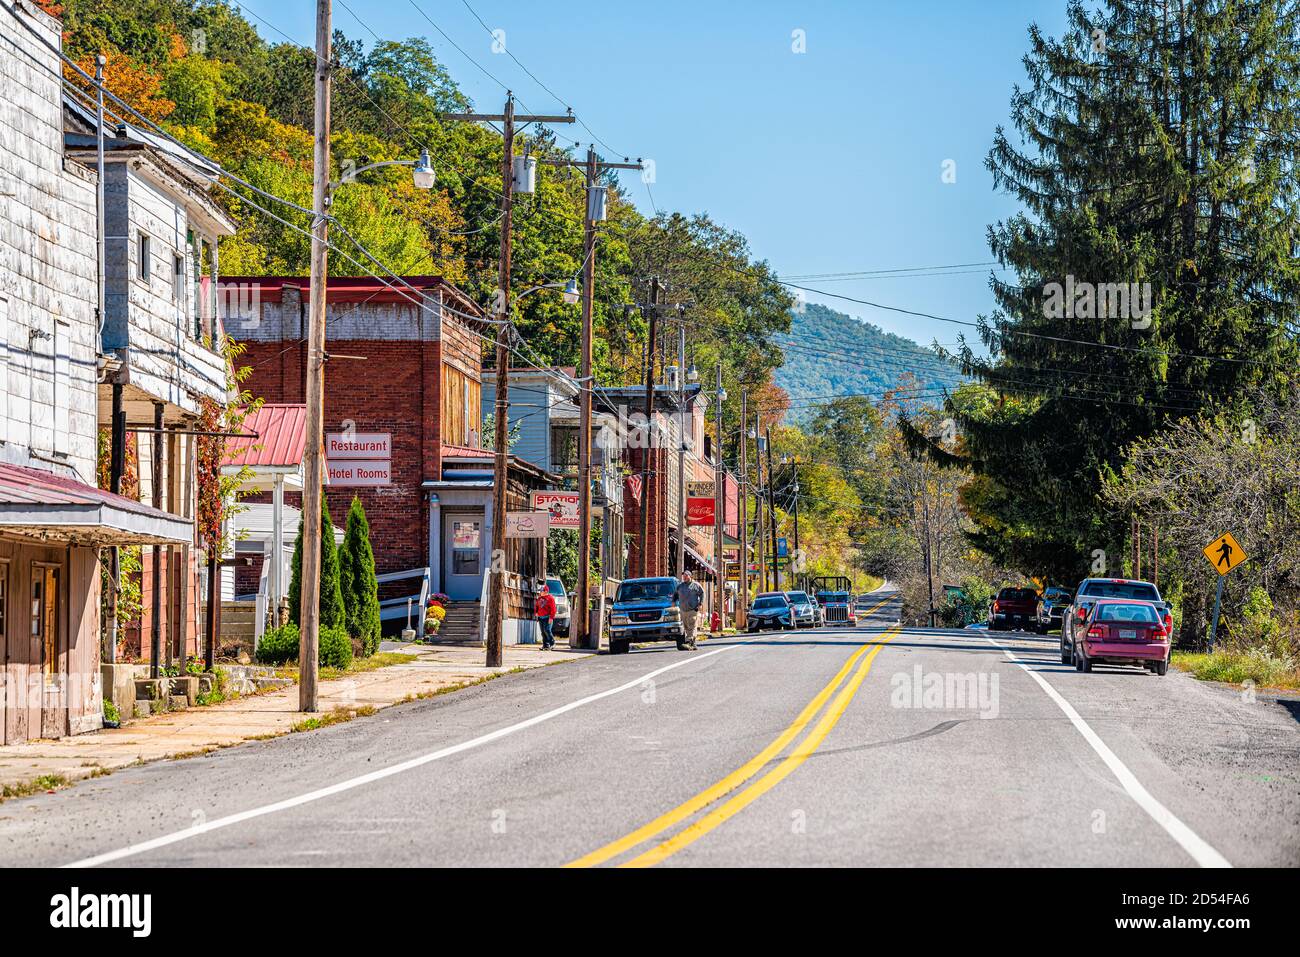 Durbin, USA - October 6, 2020: Town in West Virginia countryside and house buildings downtown main street highway road shops store in Bartow Frank are Stock Photo